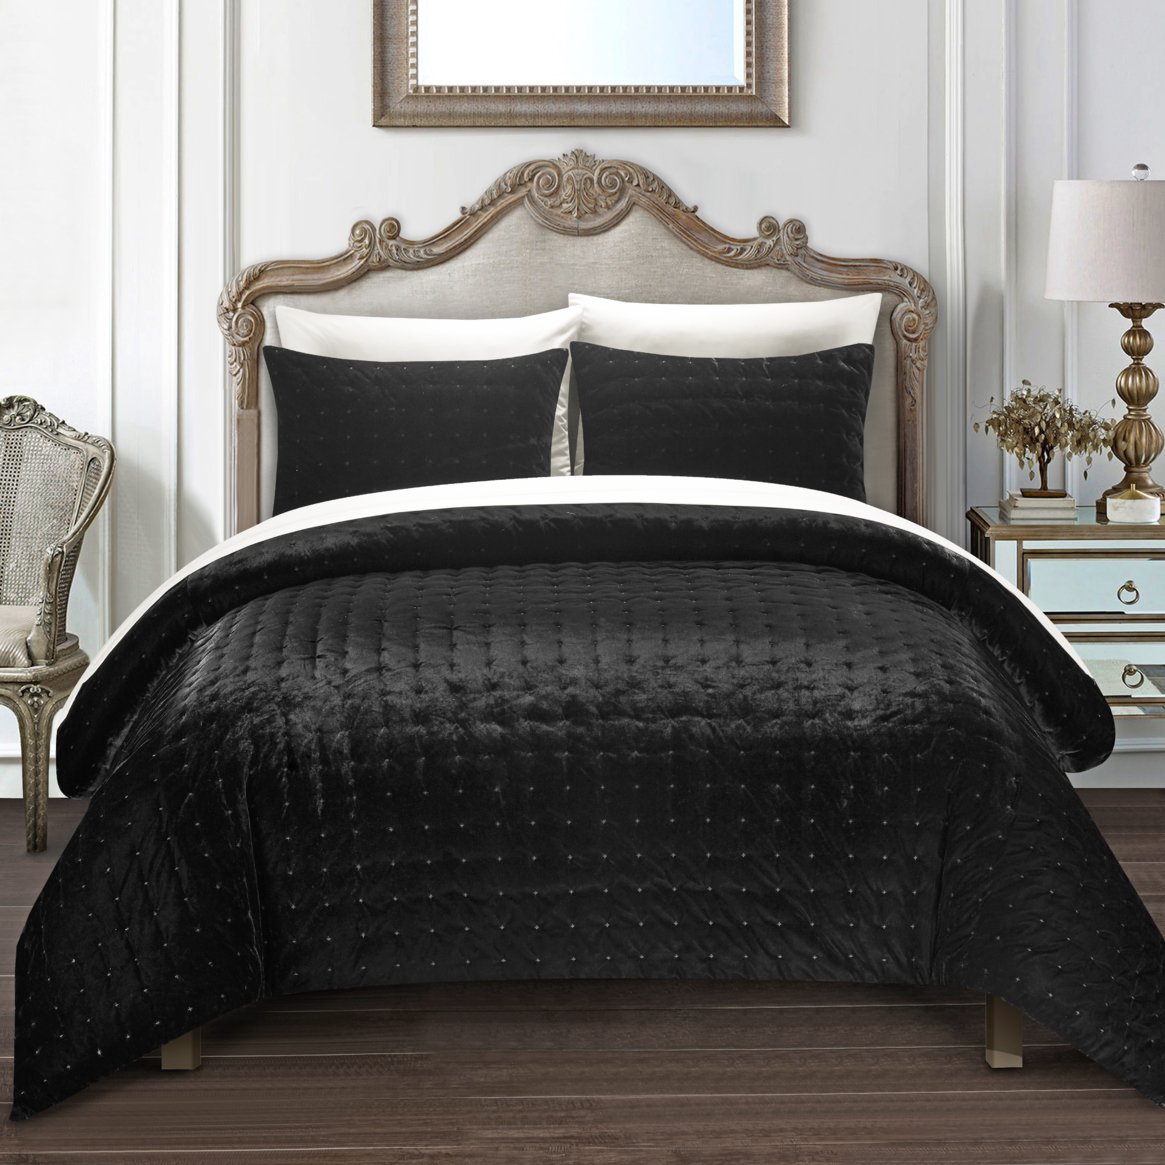 Chaya 7 Piece Comforter Set Luxurious Hand Stitched Velvet Bed In A Bag Bedding - Black, King